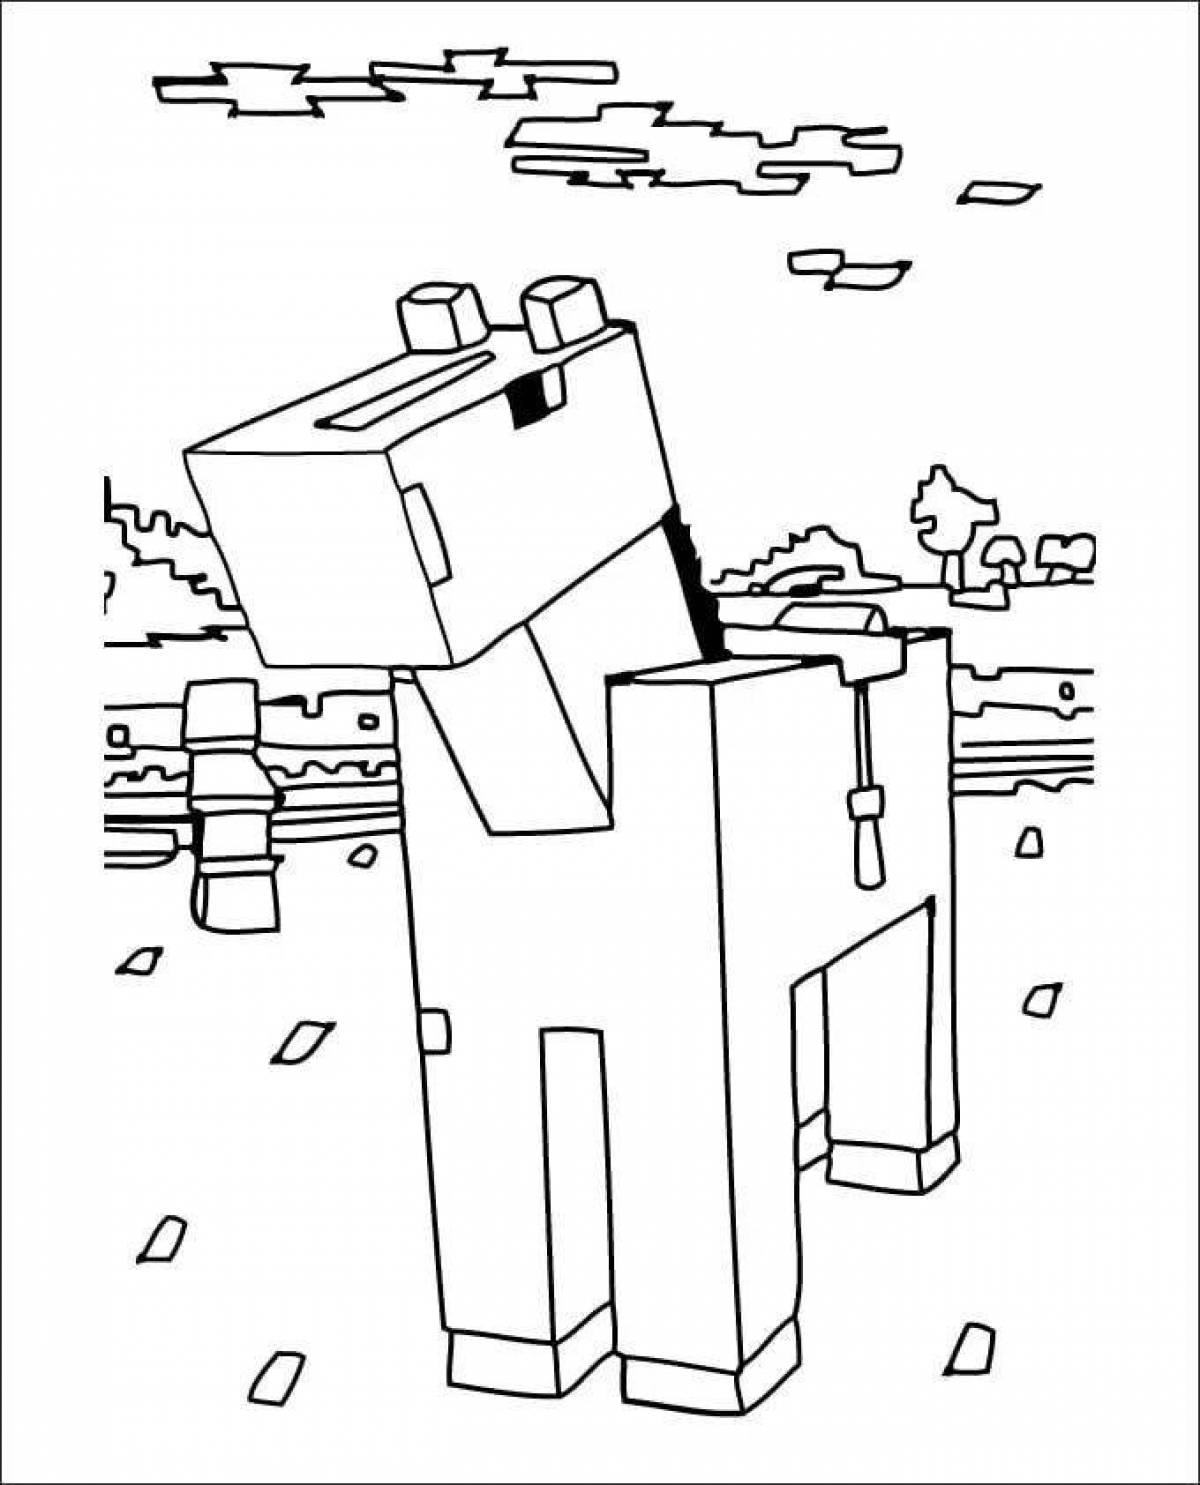 Adorable minecraft animal coloring page